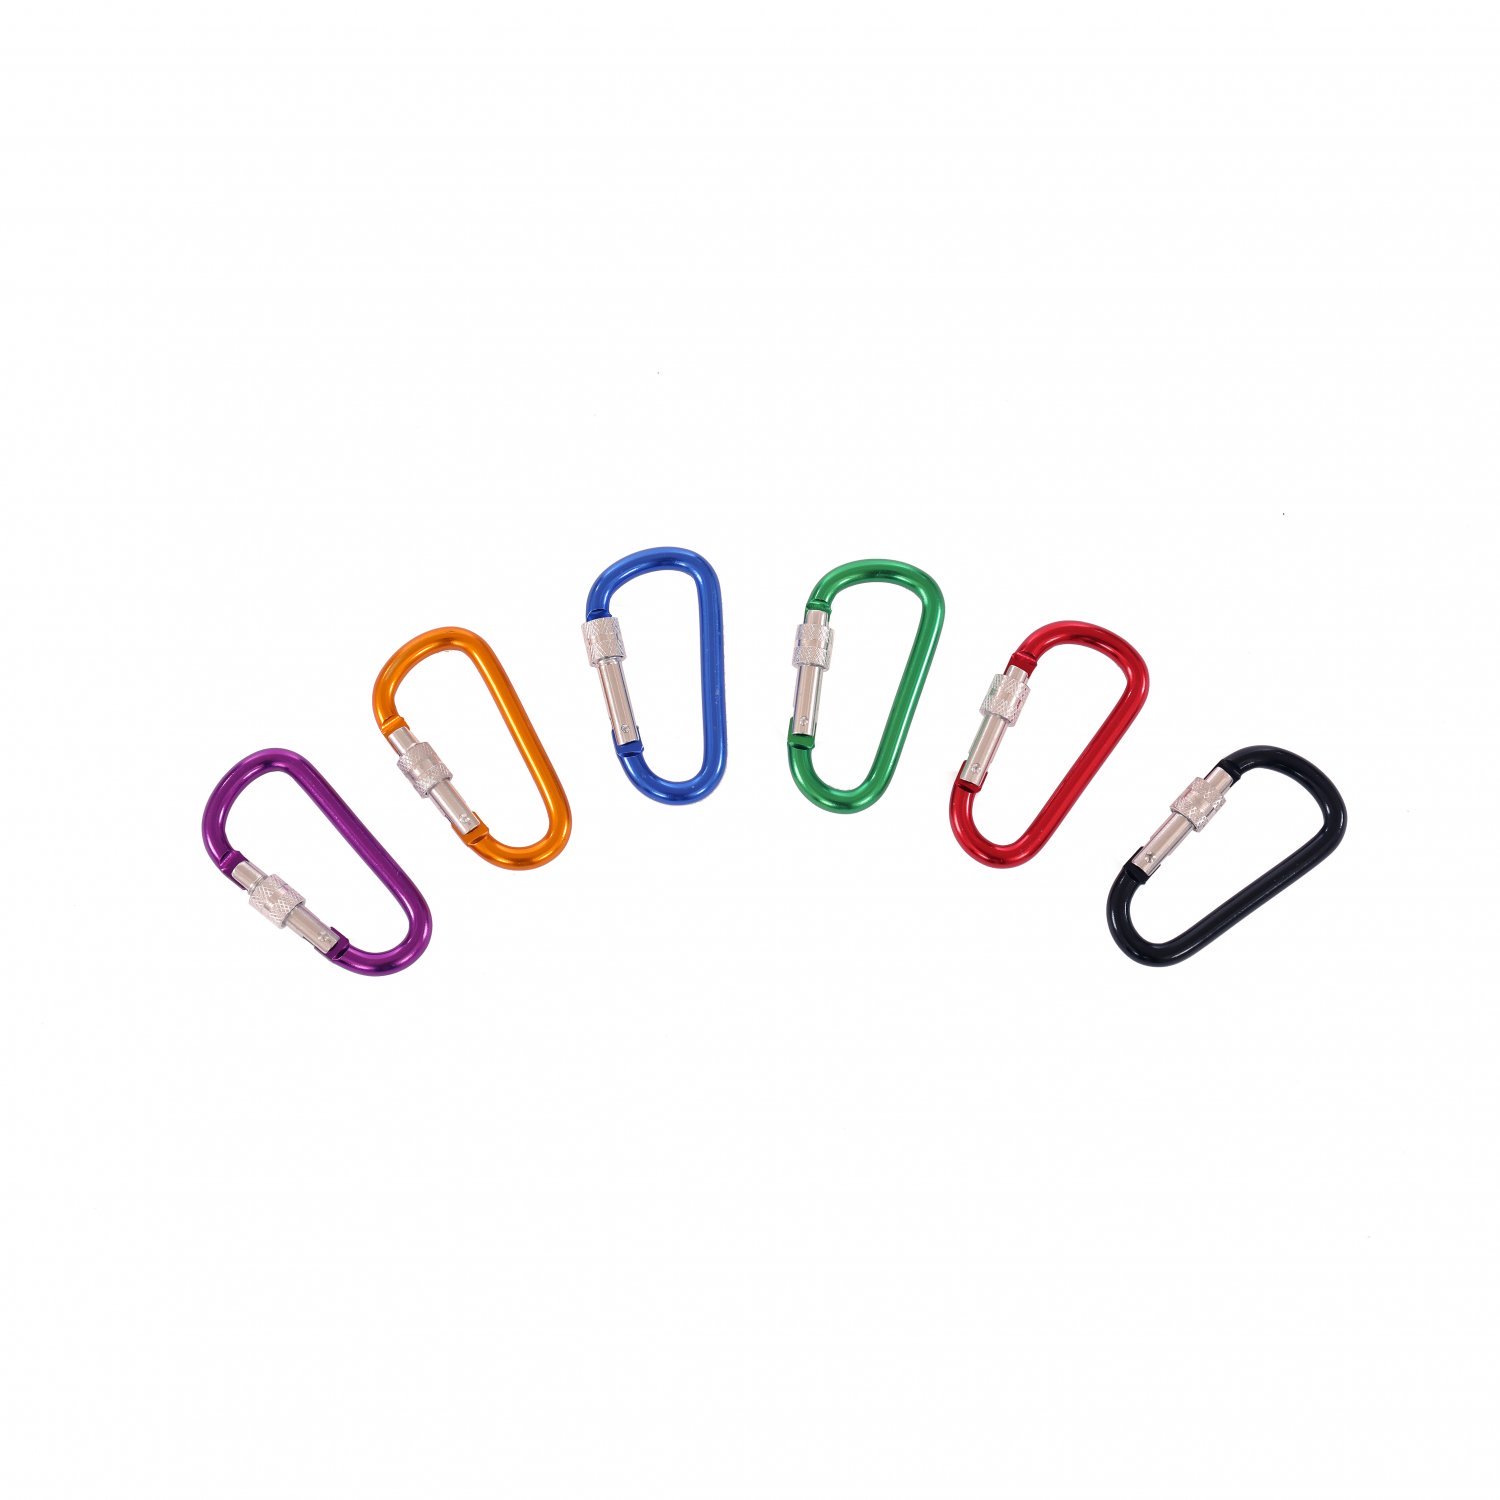 Set of 6 Multi-coloured Hiking Camping Carabiner D-Ring Clip Hoo